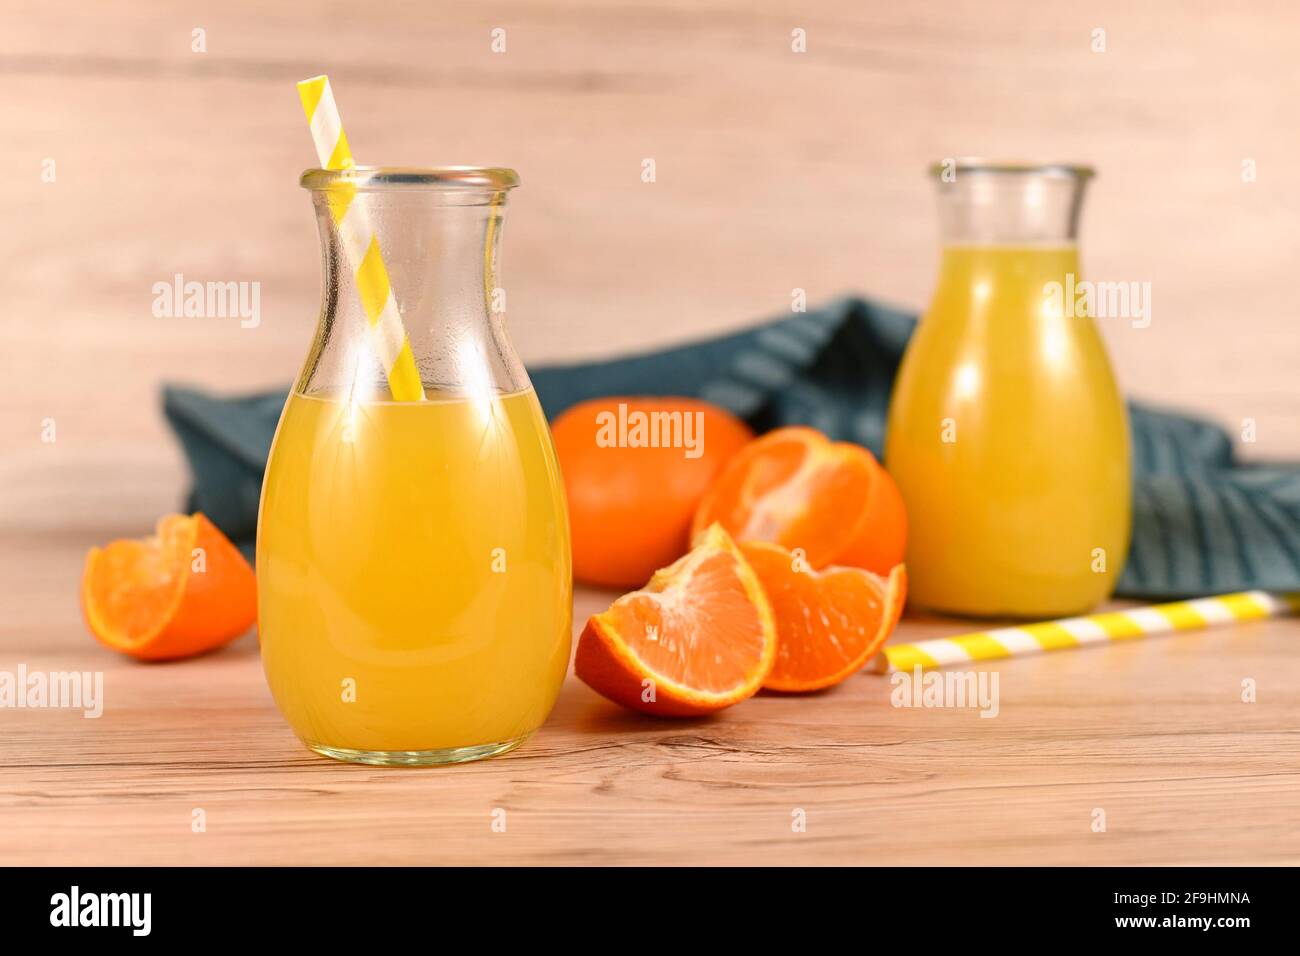 Jars with homemade lemonade made from citrus fruits Stock Photo